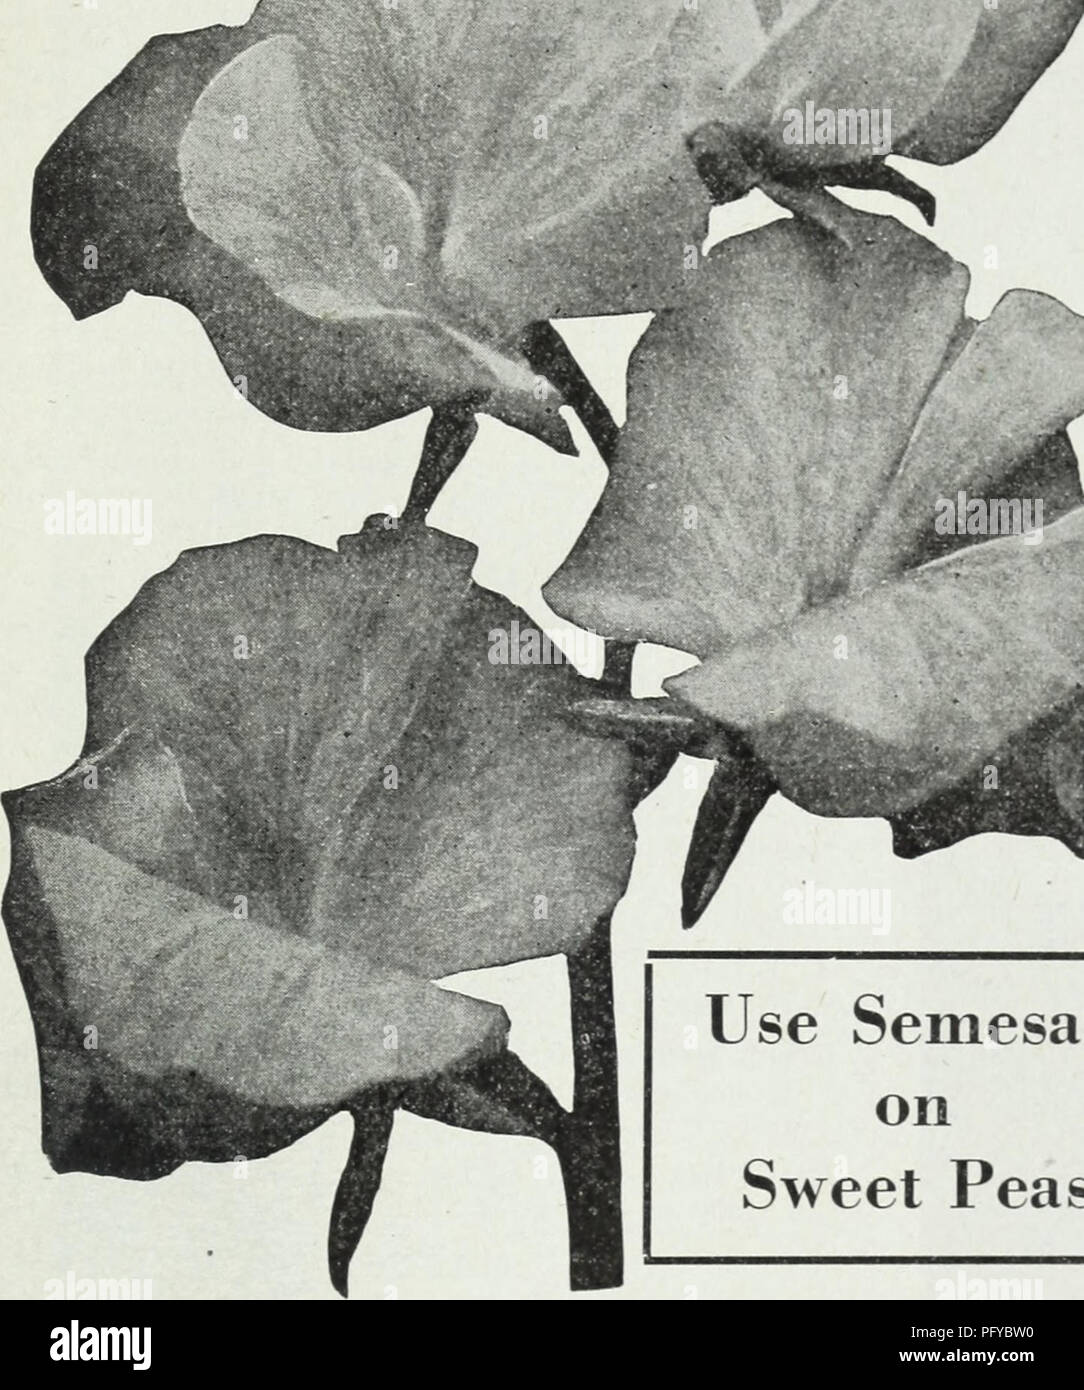 . Currie's farm and garden annual : spring 1930. Flowers Seeds Catalogs; Bulbs (Plants) Seeds Catalogs; Vegetables Seeds Catalogs; Nurseries (Horticulture) Catalogs; Plants, Ornamental Catalogs; Gardening Equipment and supplies Catalogs. / &gt; &gt; m Use Semesan on Sweet Peas SWEET PEAS Beautiful, Fragrant, Fashionable HOW TO GROW THEM Sweet Peas should be planted as early in spring as the ground can be worked. Rich loam with an abundance of well rotted manure is an ideal soil. A trench about 6 inches deep should be made, sowing the seed thinly in the bottom, and cover with an inch of soil, p Stock Photo